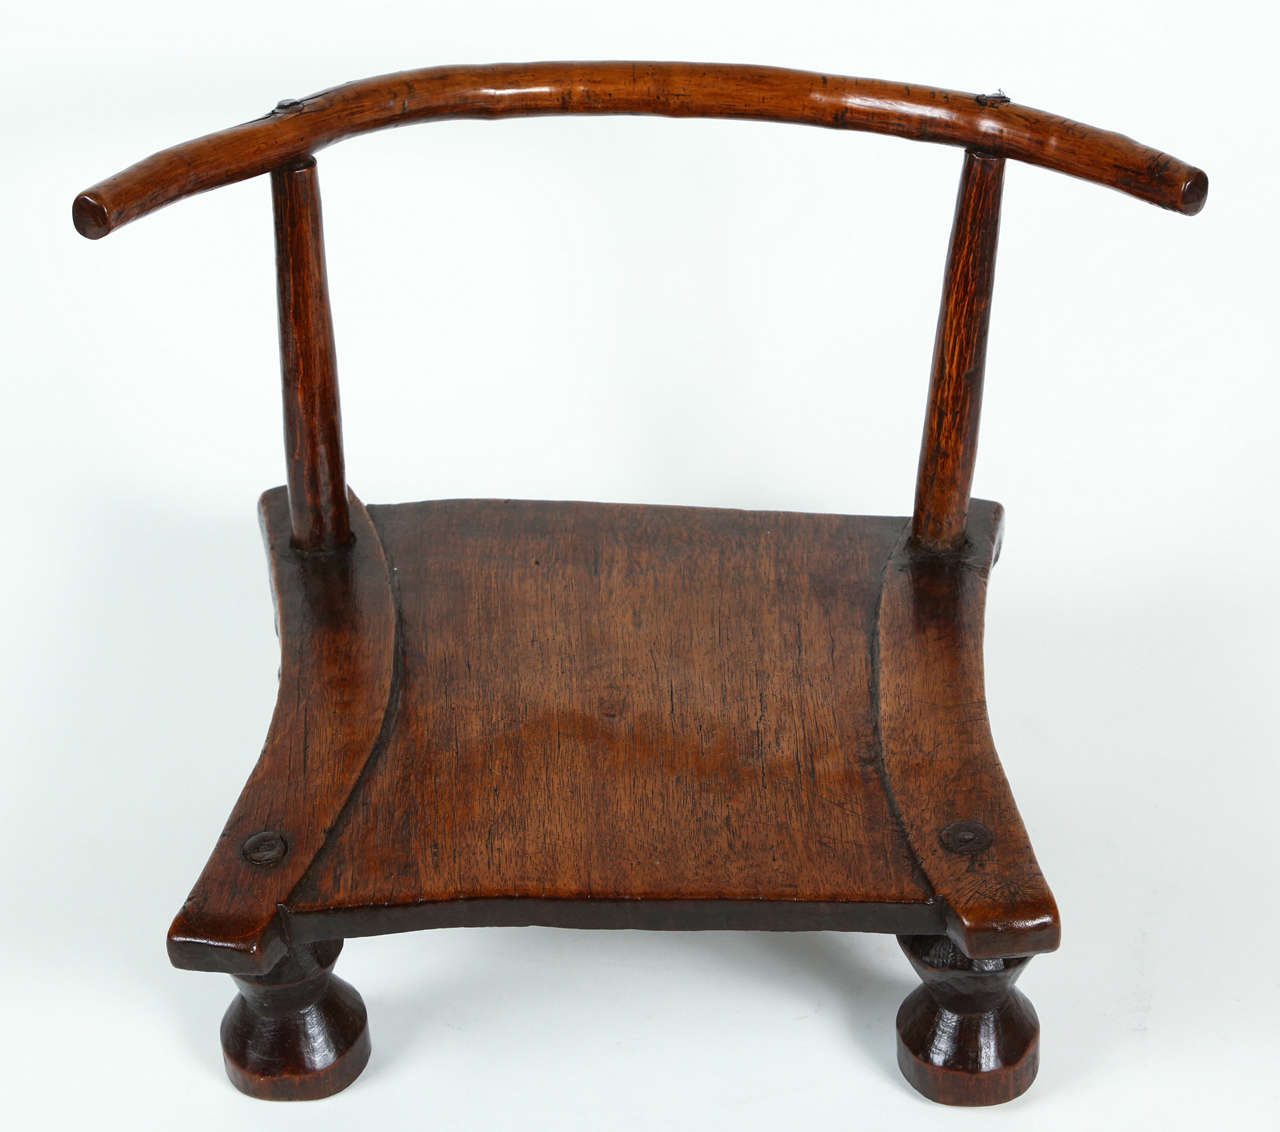 A hand-carved, small, low chair from the Dan tribe known as a grandfather's chair. These small chairs are usually part of the household effects of a distinguished family and are regarded as private property, which one would have to ask permission to